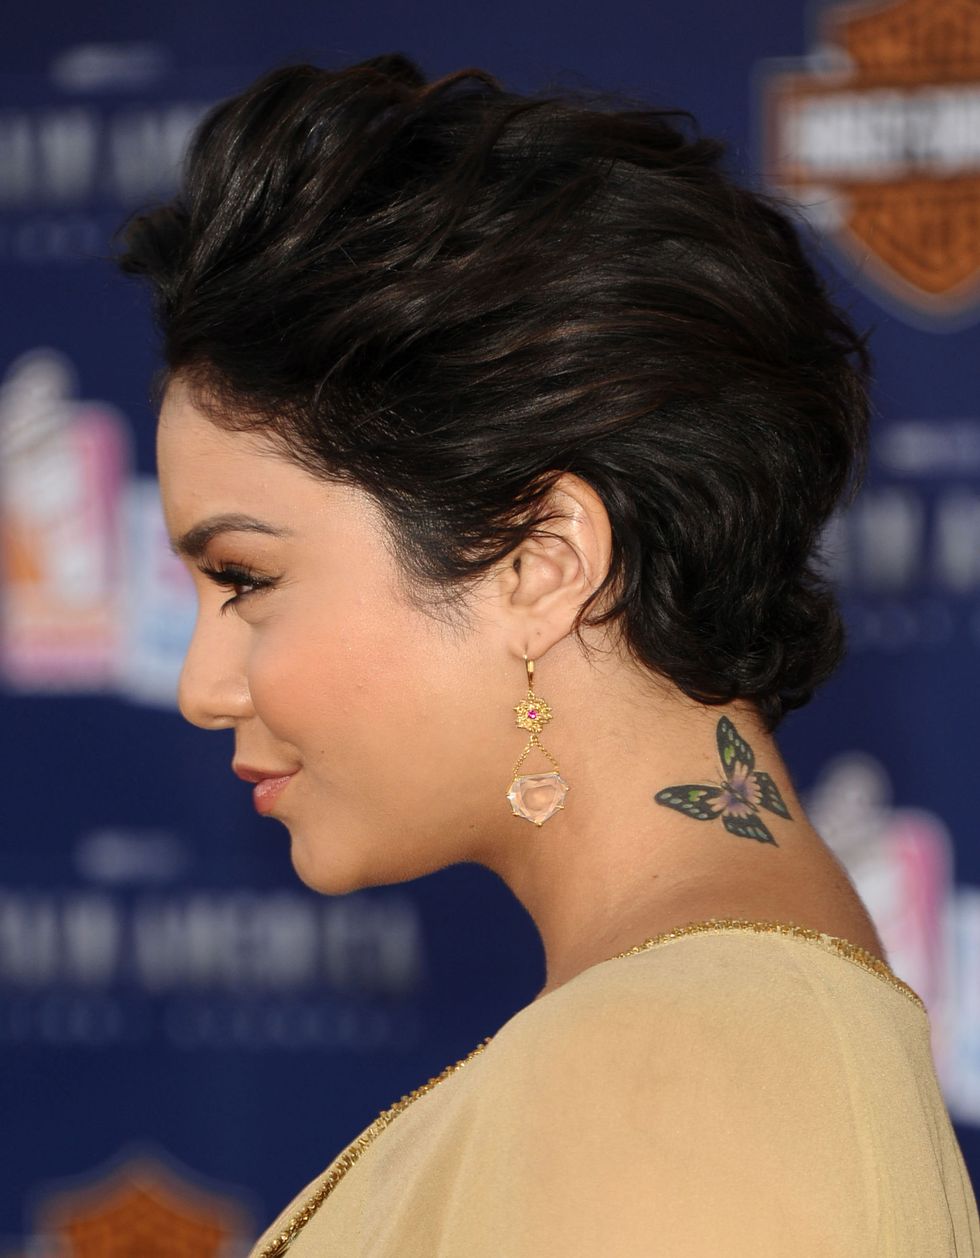 <p>The actress got her first tattoo when she was 22—a butterfly on the back of her neck. "It was very last minute, but I've actually wanted it for years," she told Letterman. "A butterfly landed on my mum's stomach a week before I was born and that's how I got my name, because Vanessa means butterfly—it's a Latin derivative." </p>